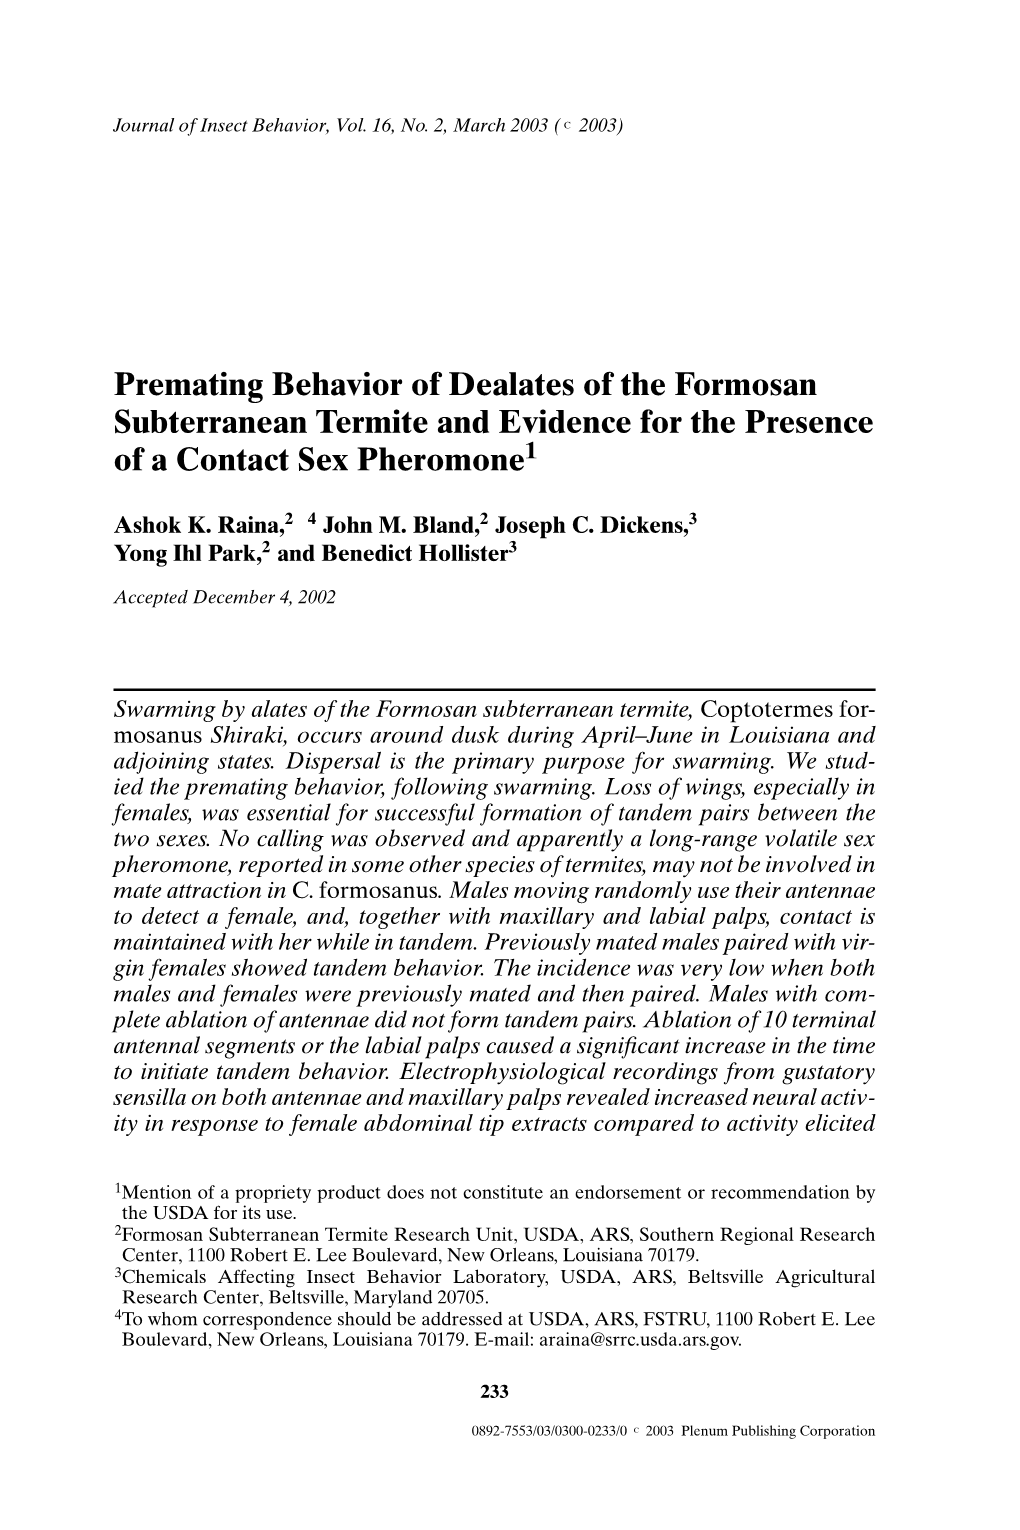 Premating Behavior of Dealates of the Formosan Subterranean Termite and Evidence for the Presence of a Contact Sex Pheromone1